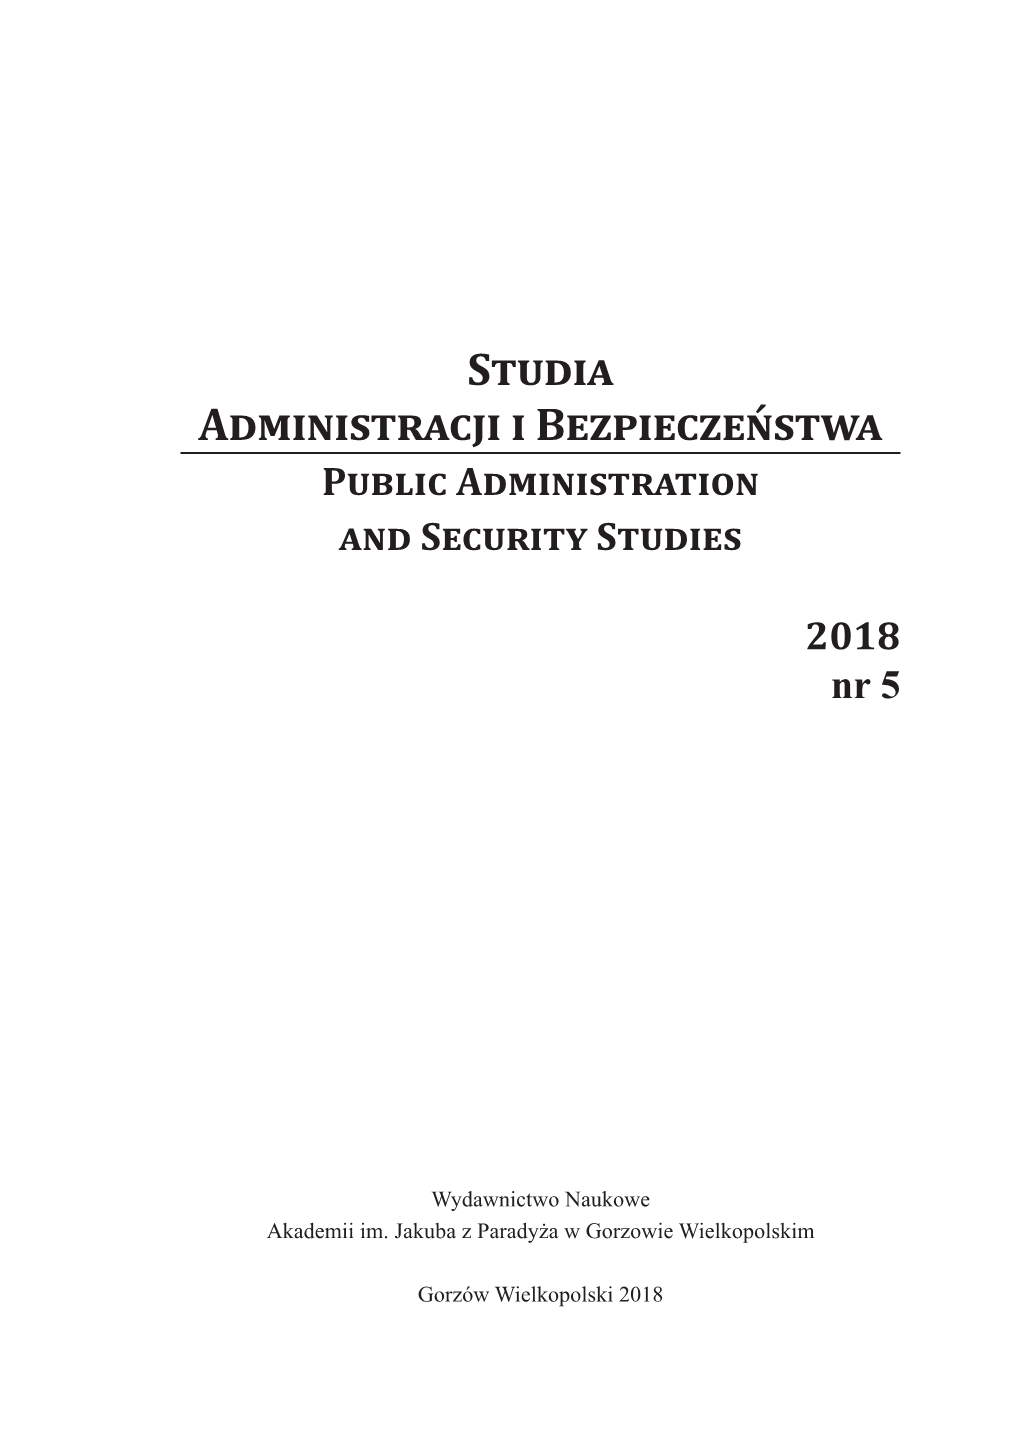 Public Administration and Security Studies 2018 Nr 5